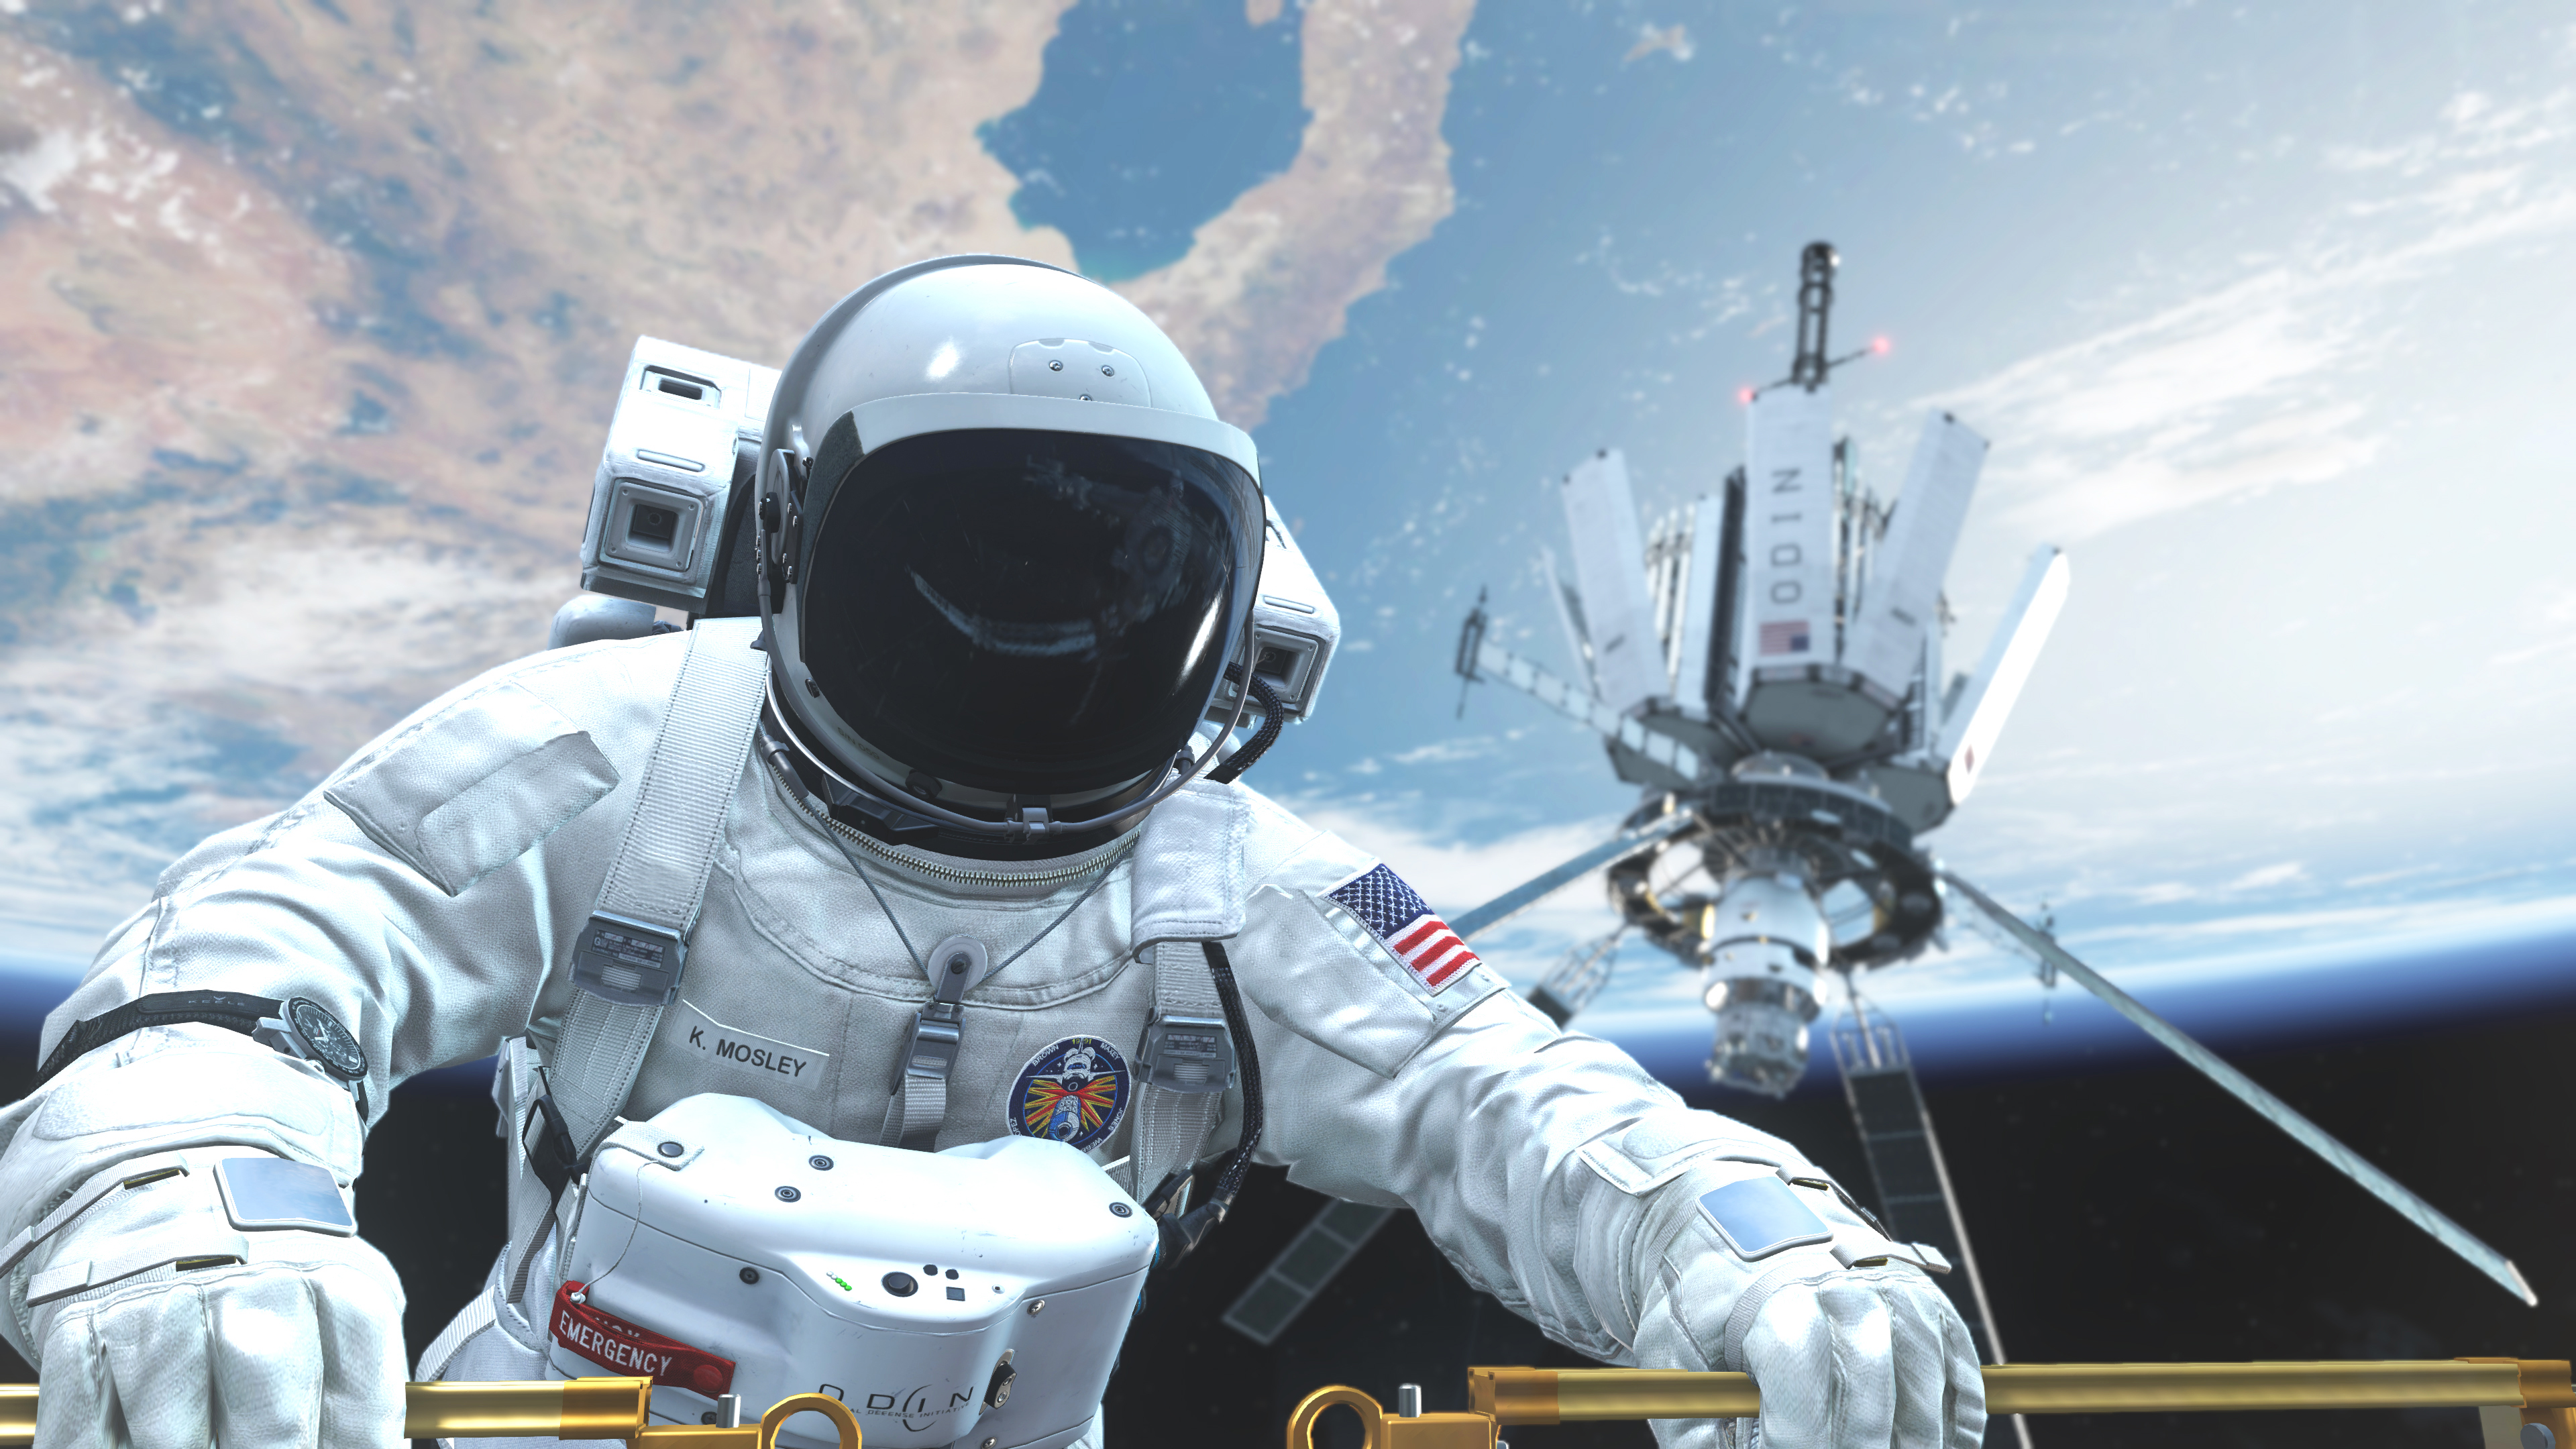 General 3840x2160 astronaut spacesuit NASA space technology orbital view helmet American flag Earth video games PC gaming Call of Duty: Ghosts Call of Duty CGI video game art Activision